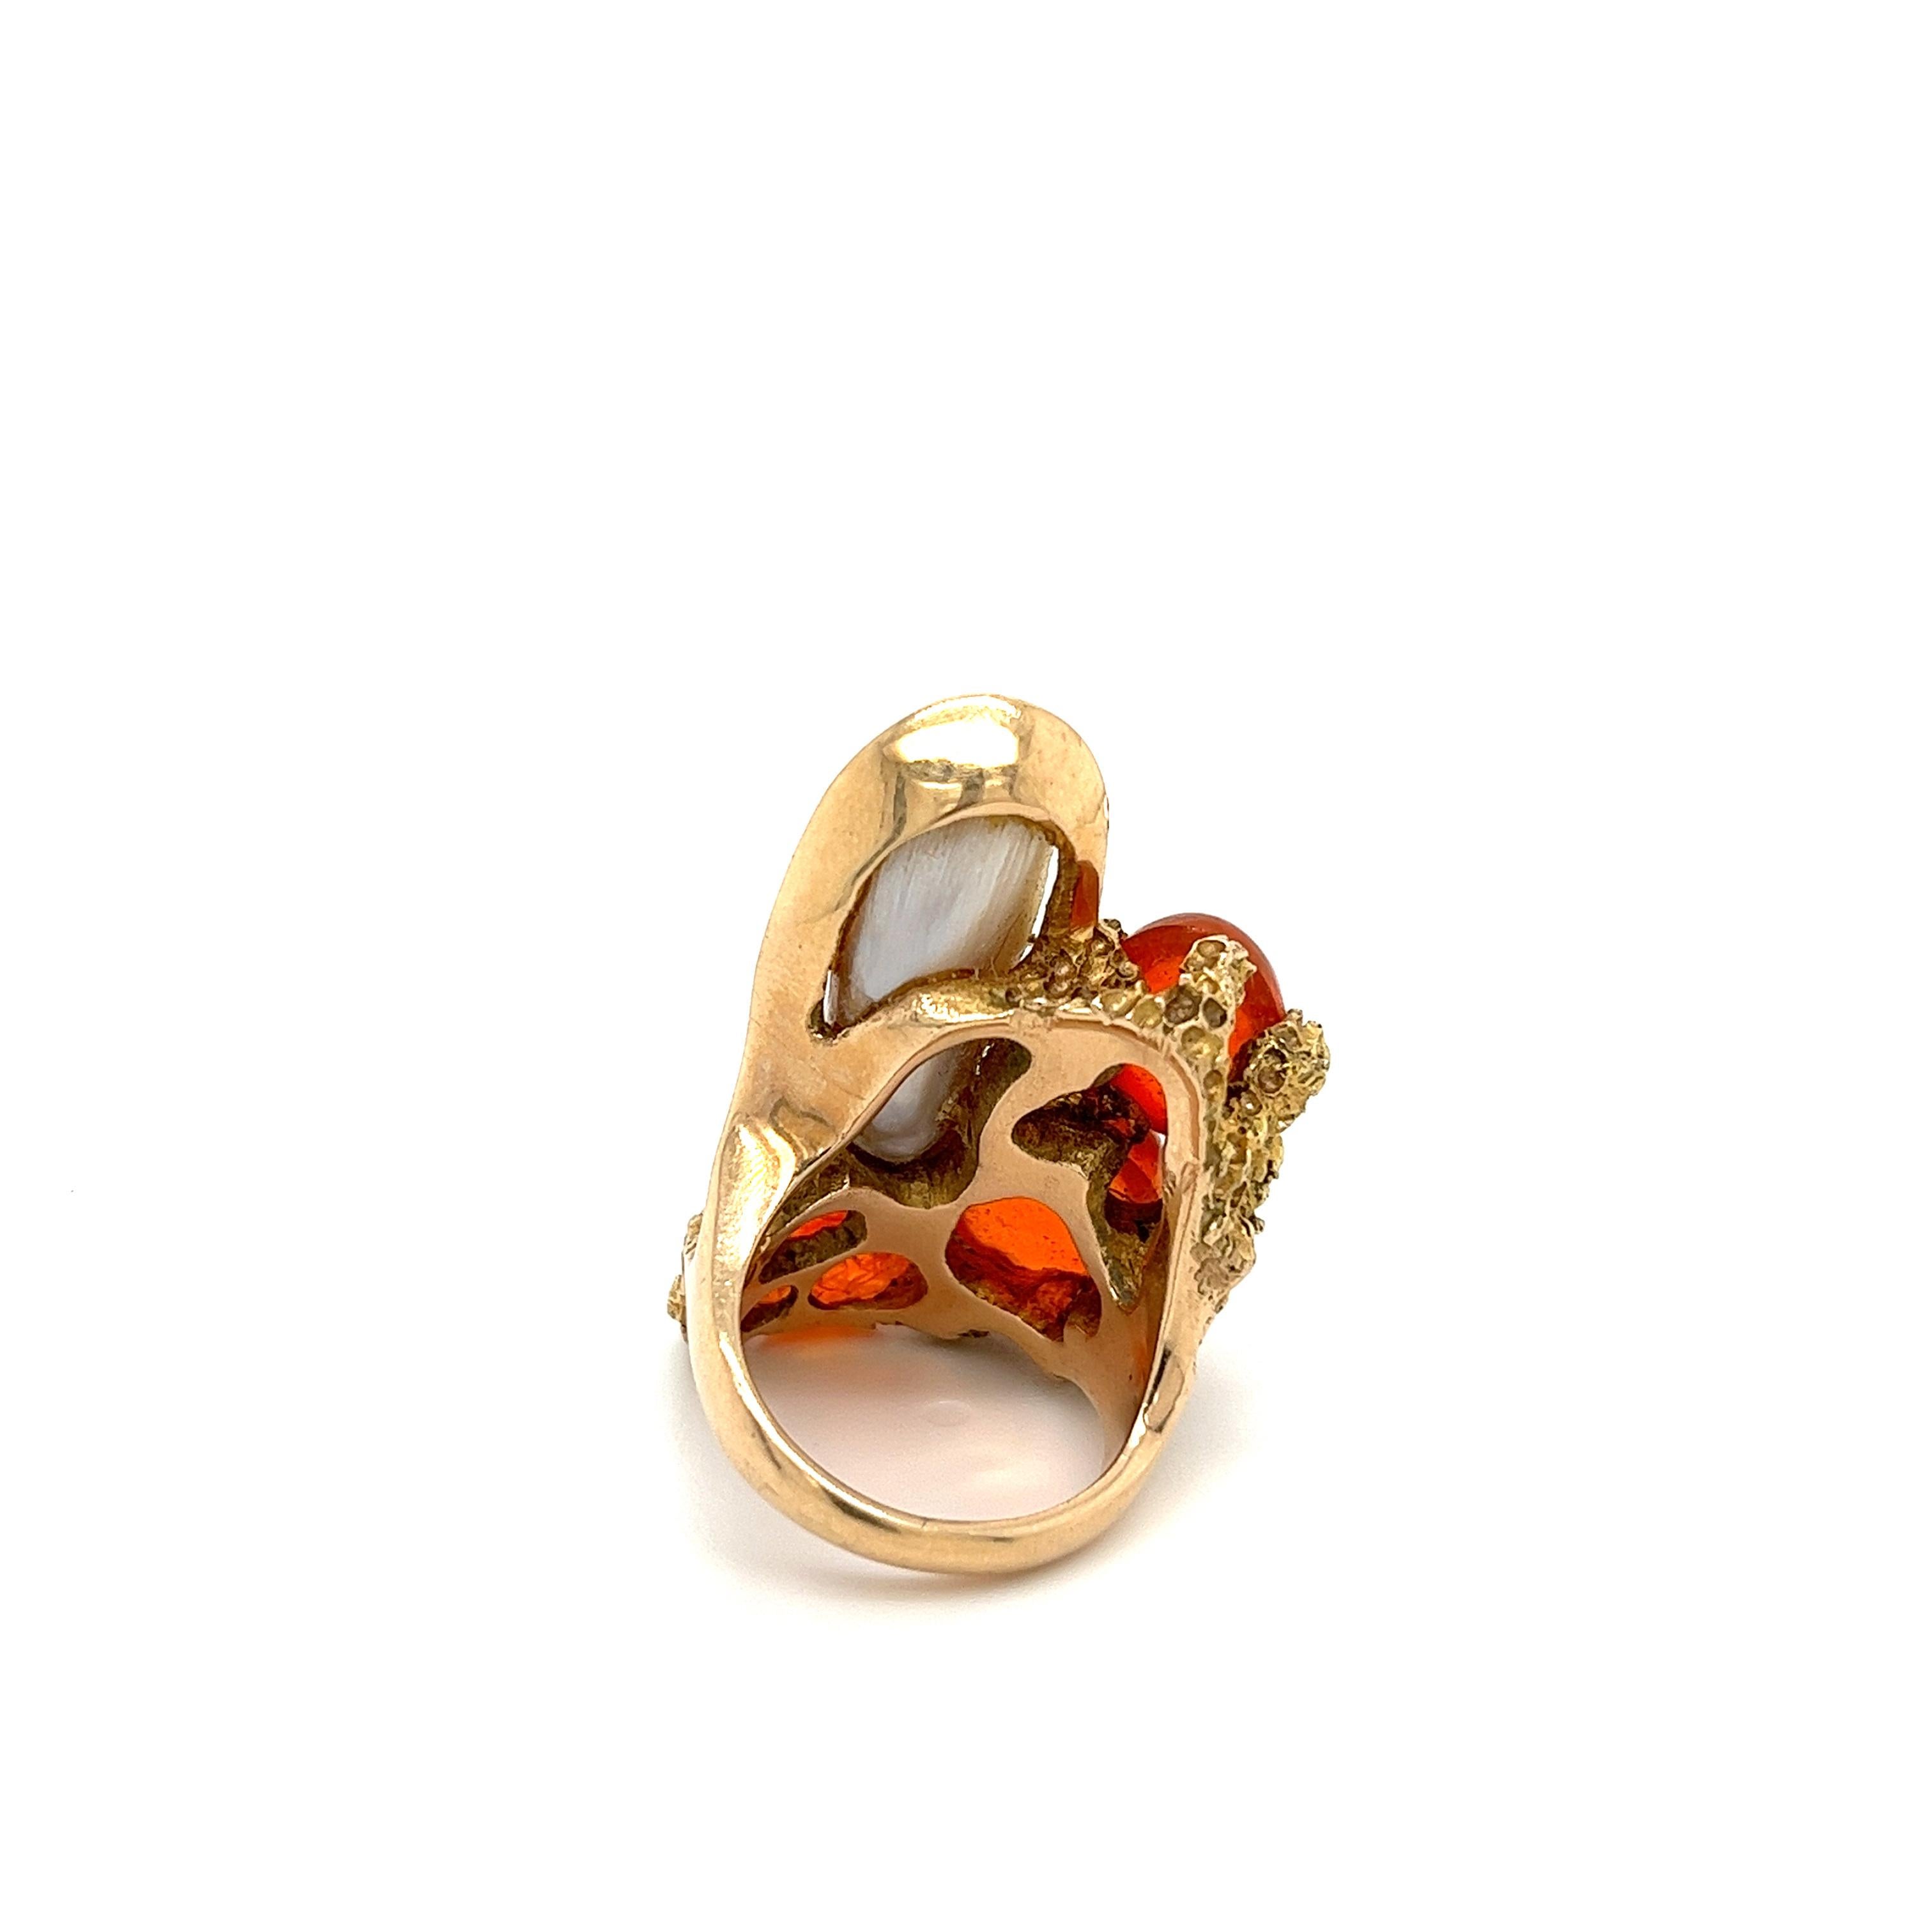 Magnificence in opals, this ring boasts 3 fiery orange tone cabochon cut Mexican opals and a lavender tone mother of pearl. A stunning masterpiece ring with a deep sea coral reef motif. 

Details: 
✔ Metal: 14K 
✔ Weight: 21.8 grams 
✔ Face Size: